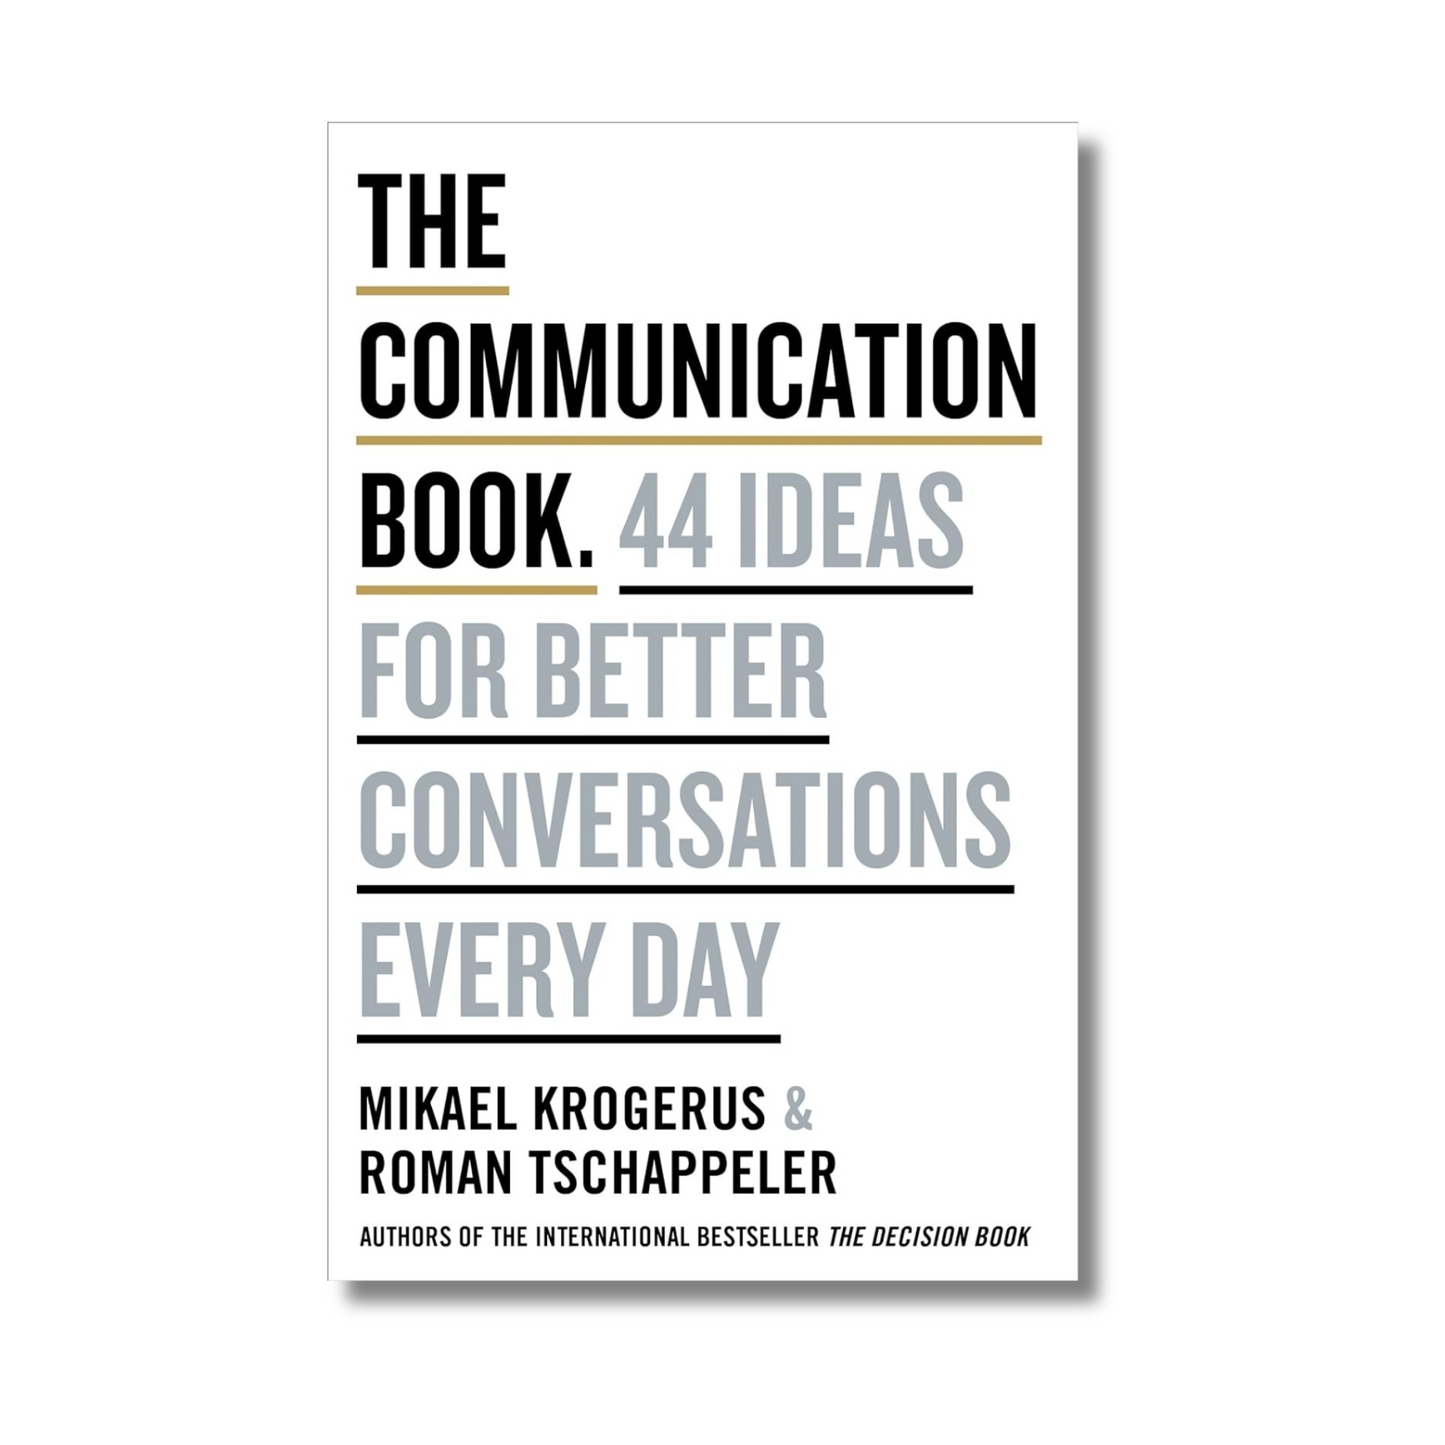 The Communication Book 44 Ideas for Better Conversation Everyday